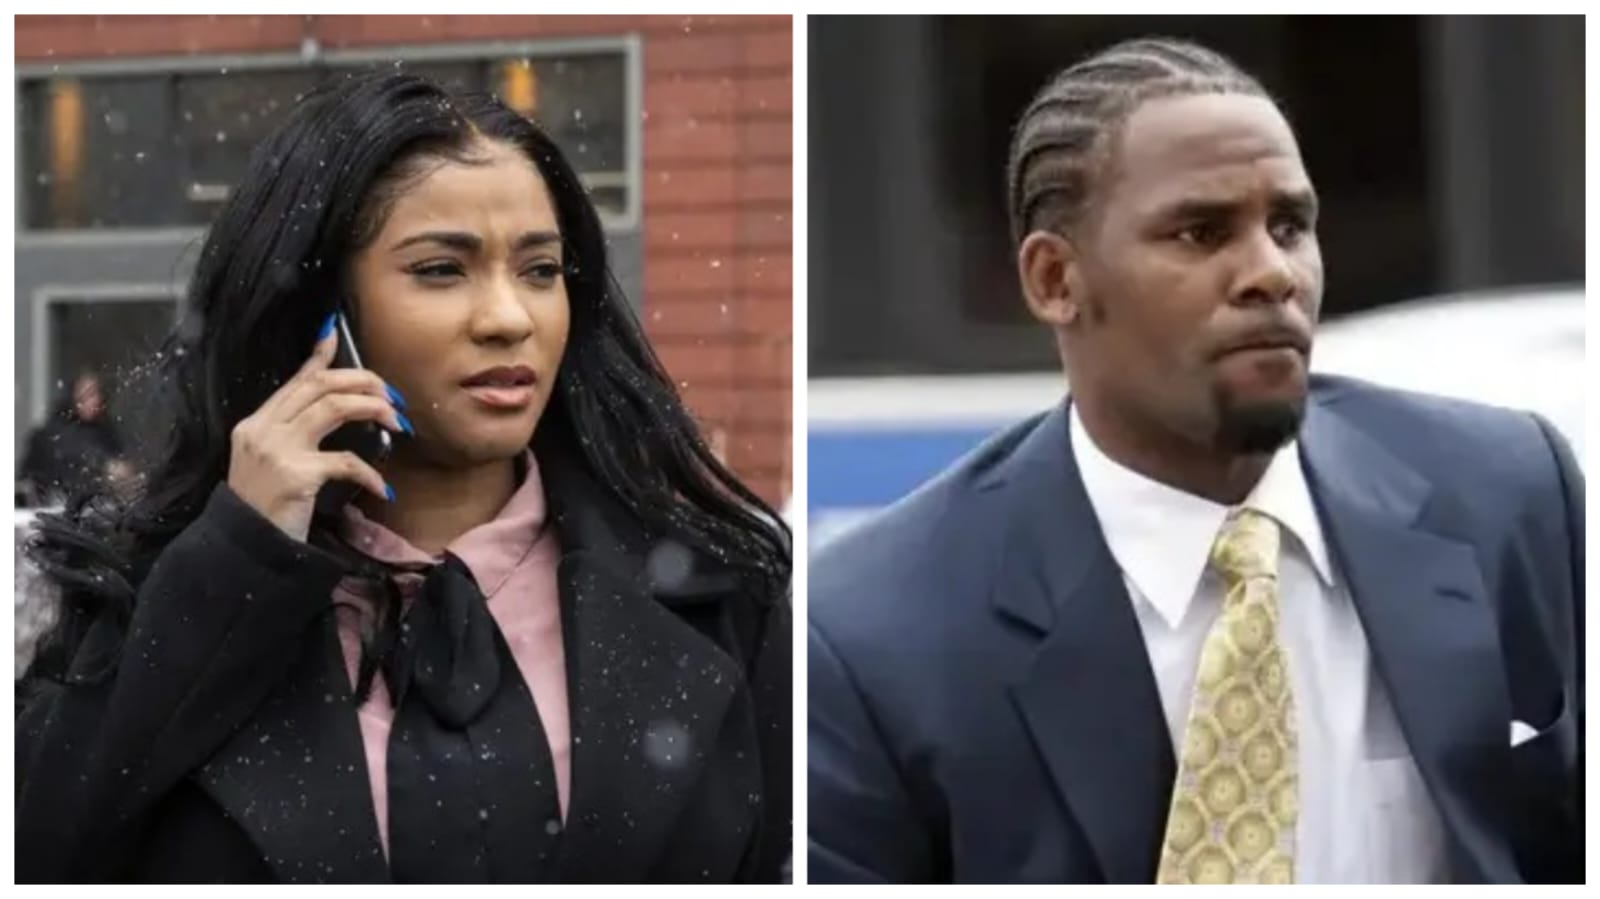 R Kelly’s fiance, Joycelyn Savage, confirms pregnancy, says singer’s lawyers ‘unhappy’